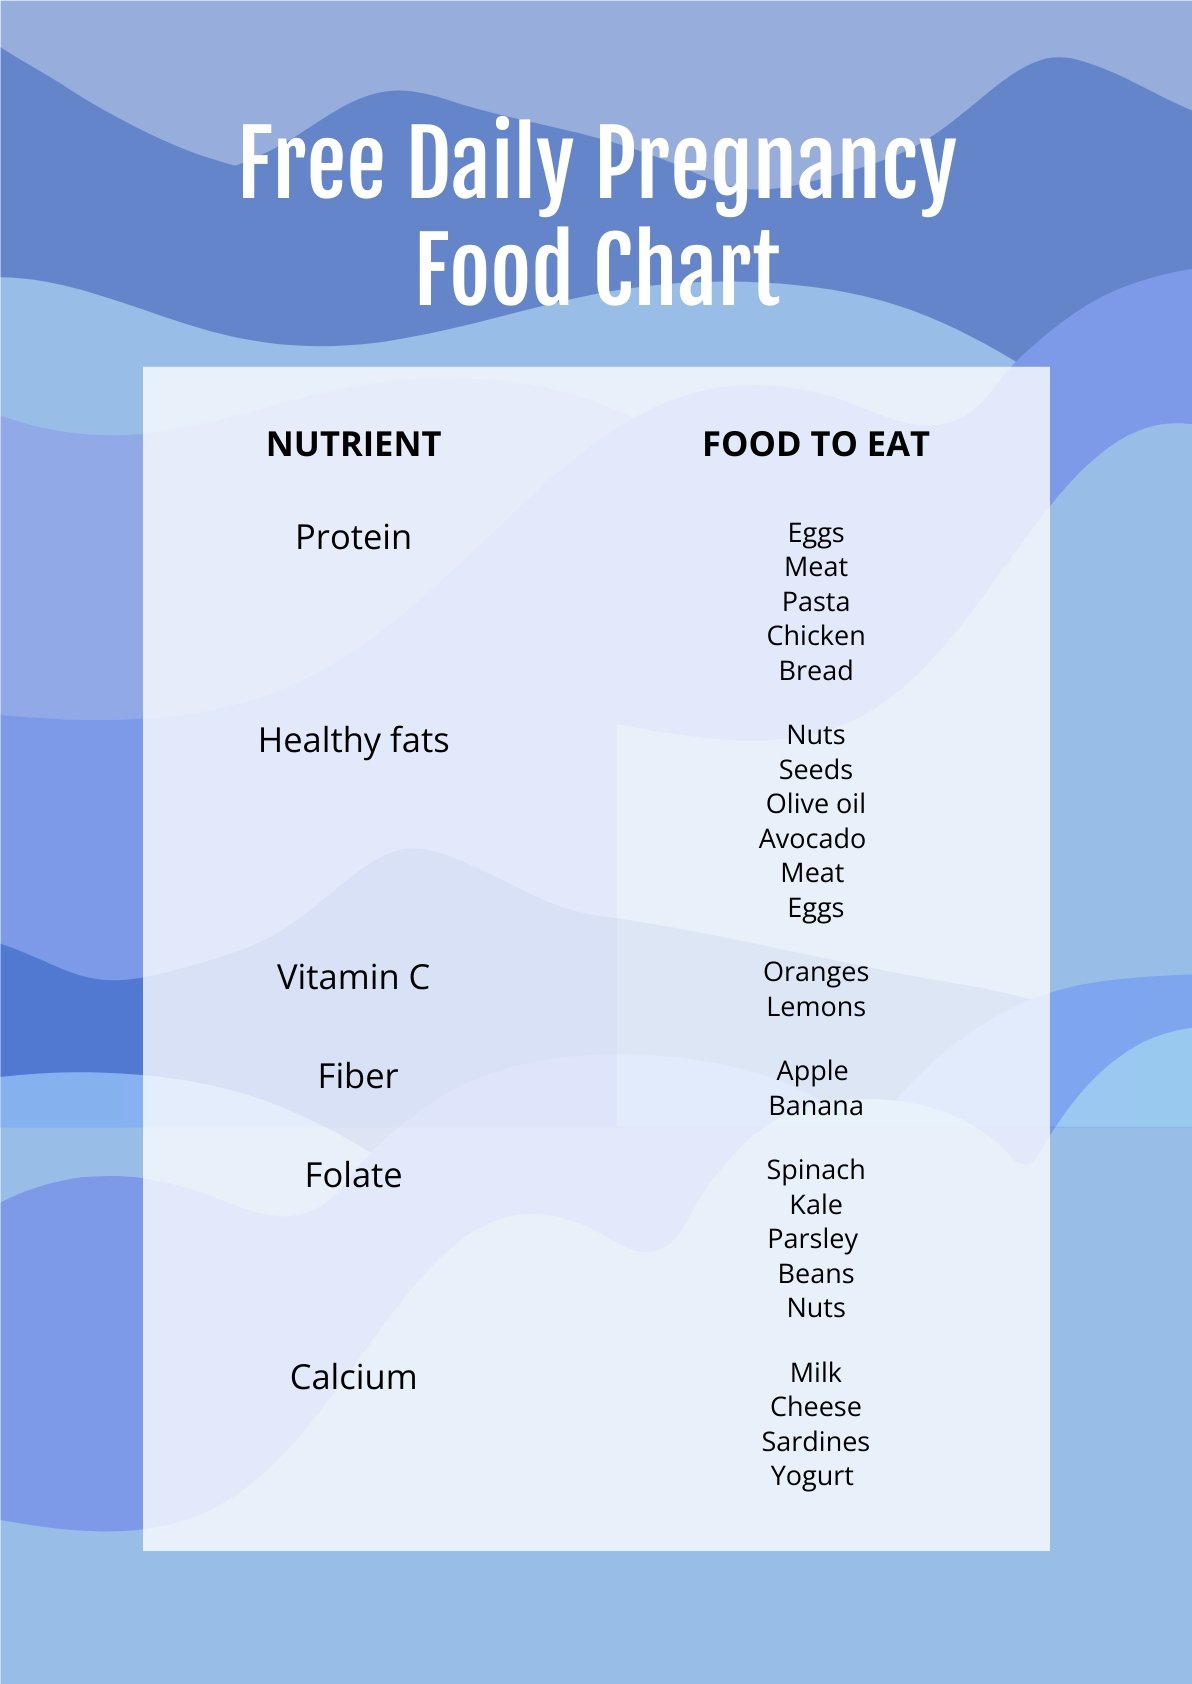 Free Pregnancy Food Chart Template Download In Pdf Photoshop